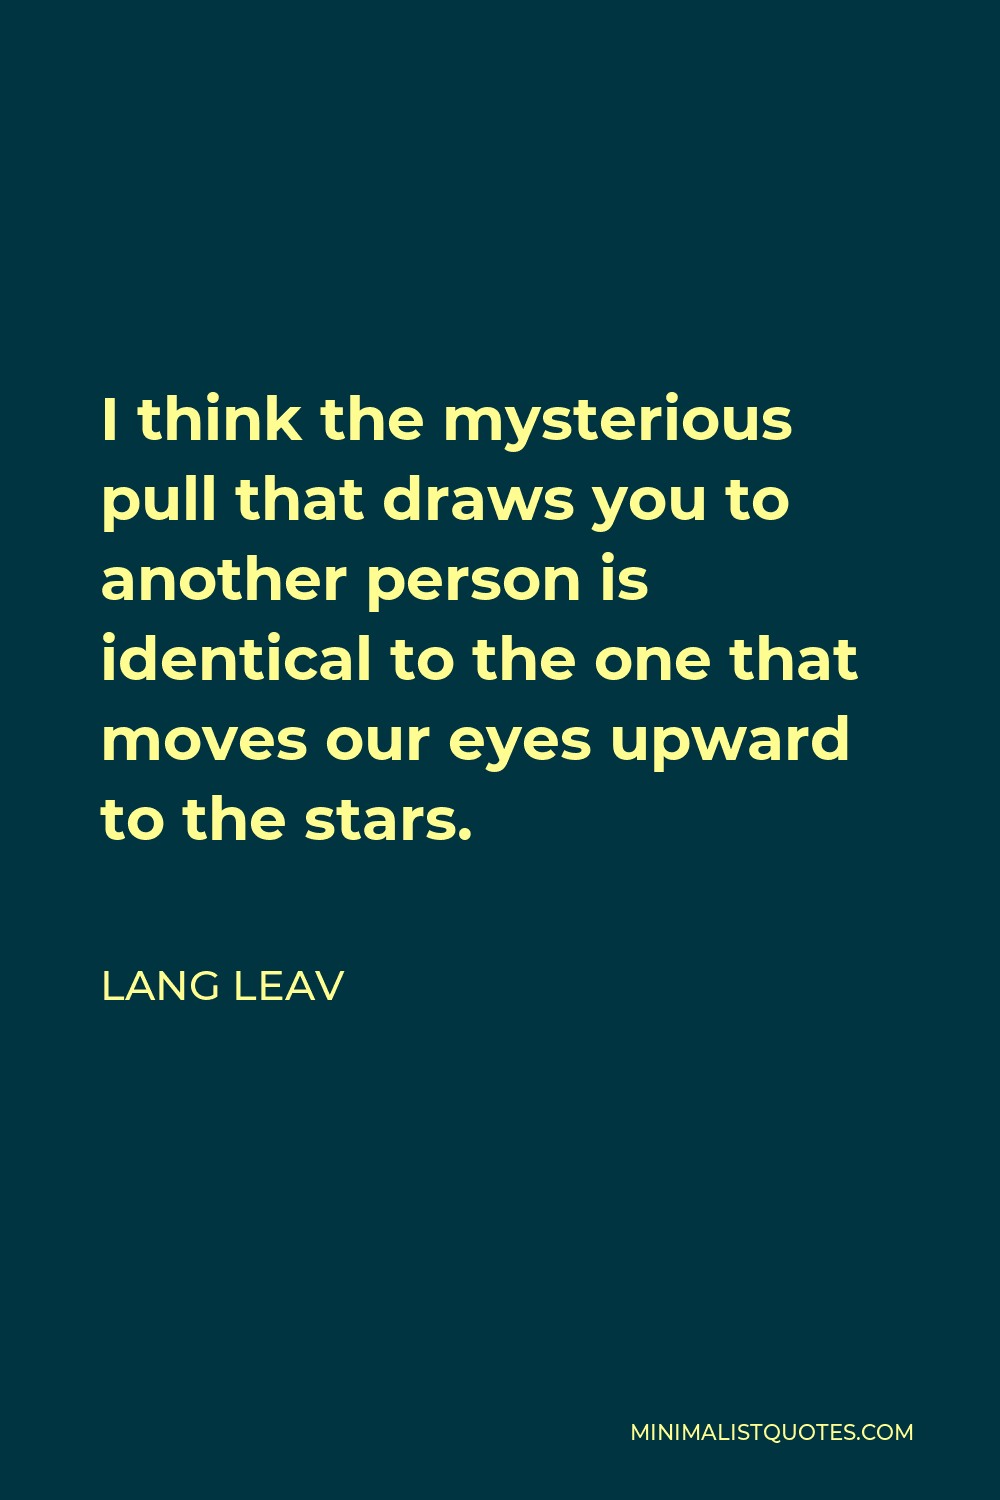 Lang Leav Quote - I think the mysterious pull that draws you to another person is identical to the one that moves our eyes upward to the stars.